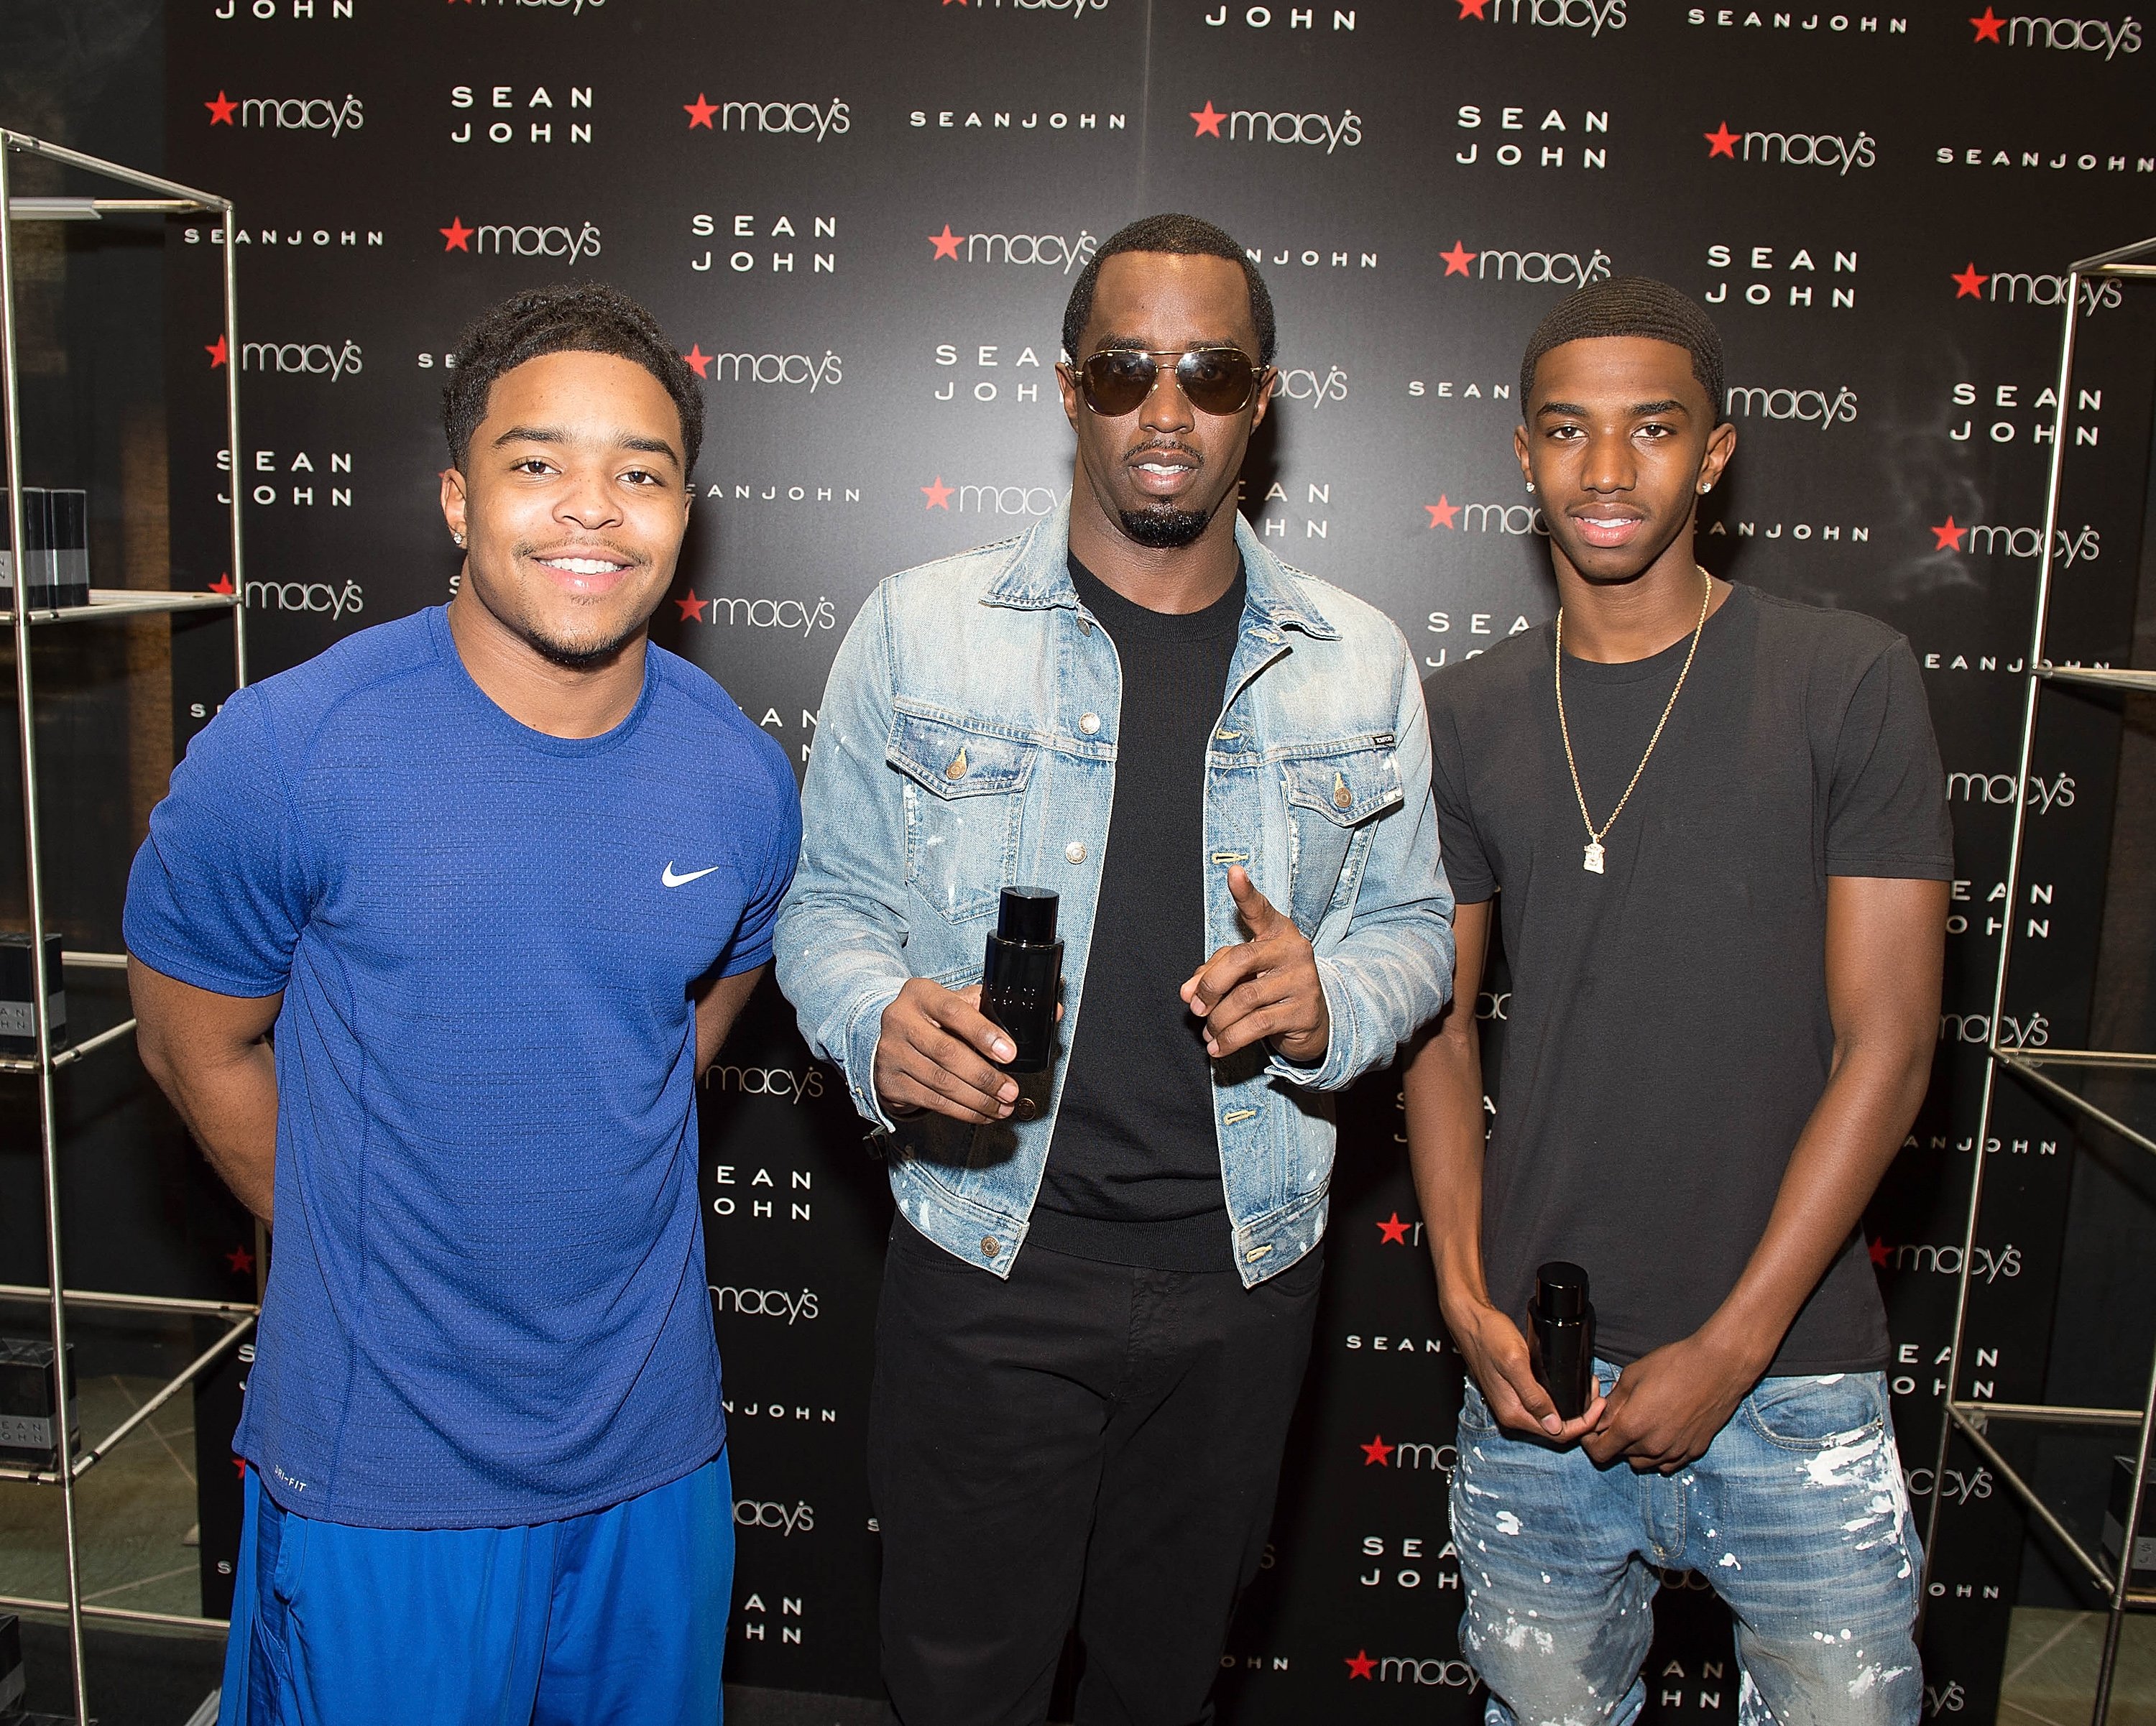  (L-R) Justin Sean "Diddy" Combs, and Christian "King" Combs pose during the  Sean John new fragrance launch at Macy's Lenox Square on September 8, 2016 in Atlanta, Georgia. | Source: Getty Images